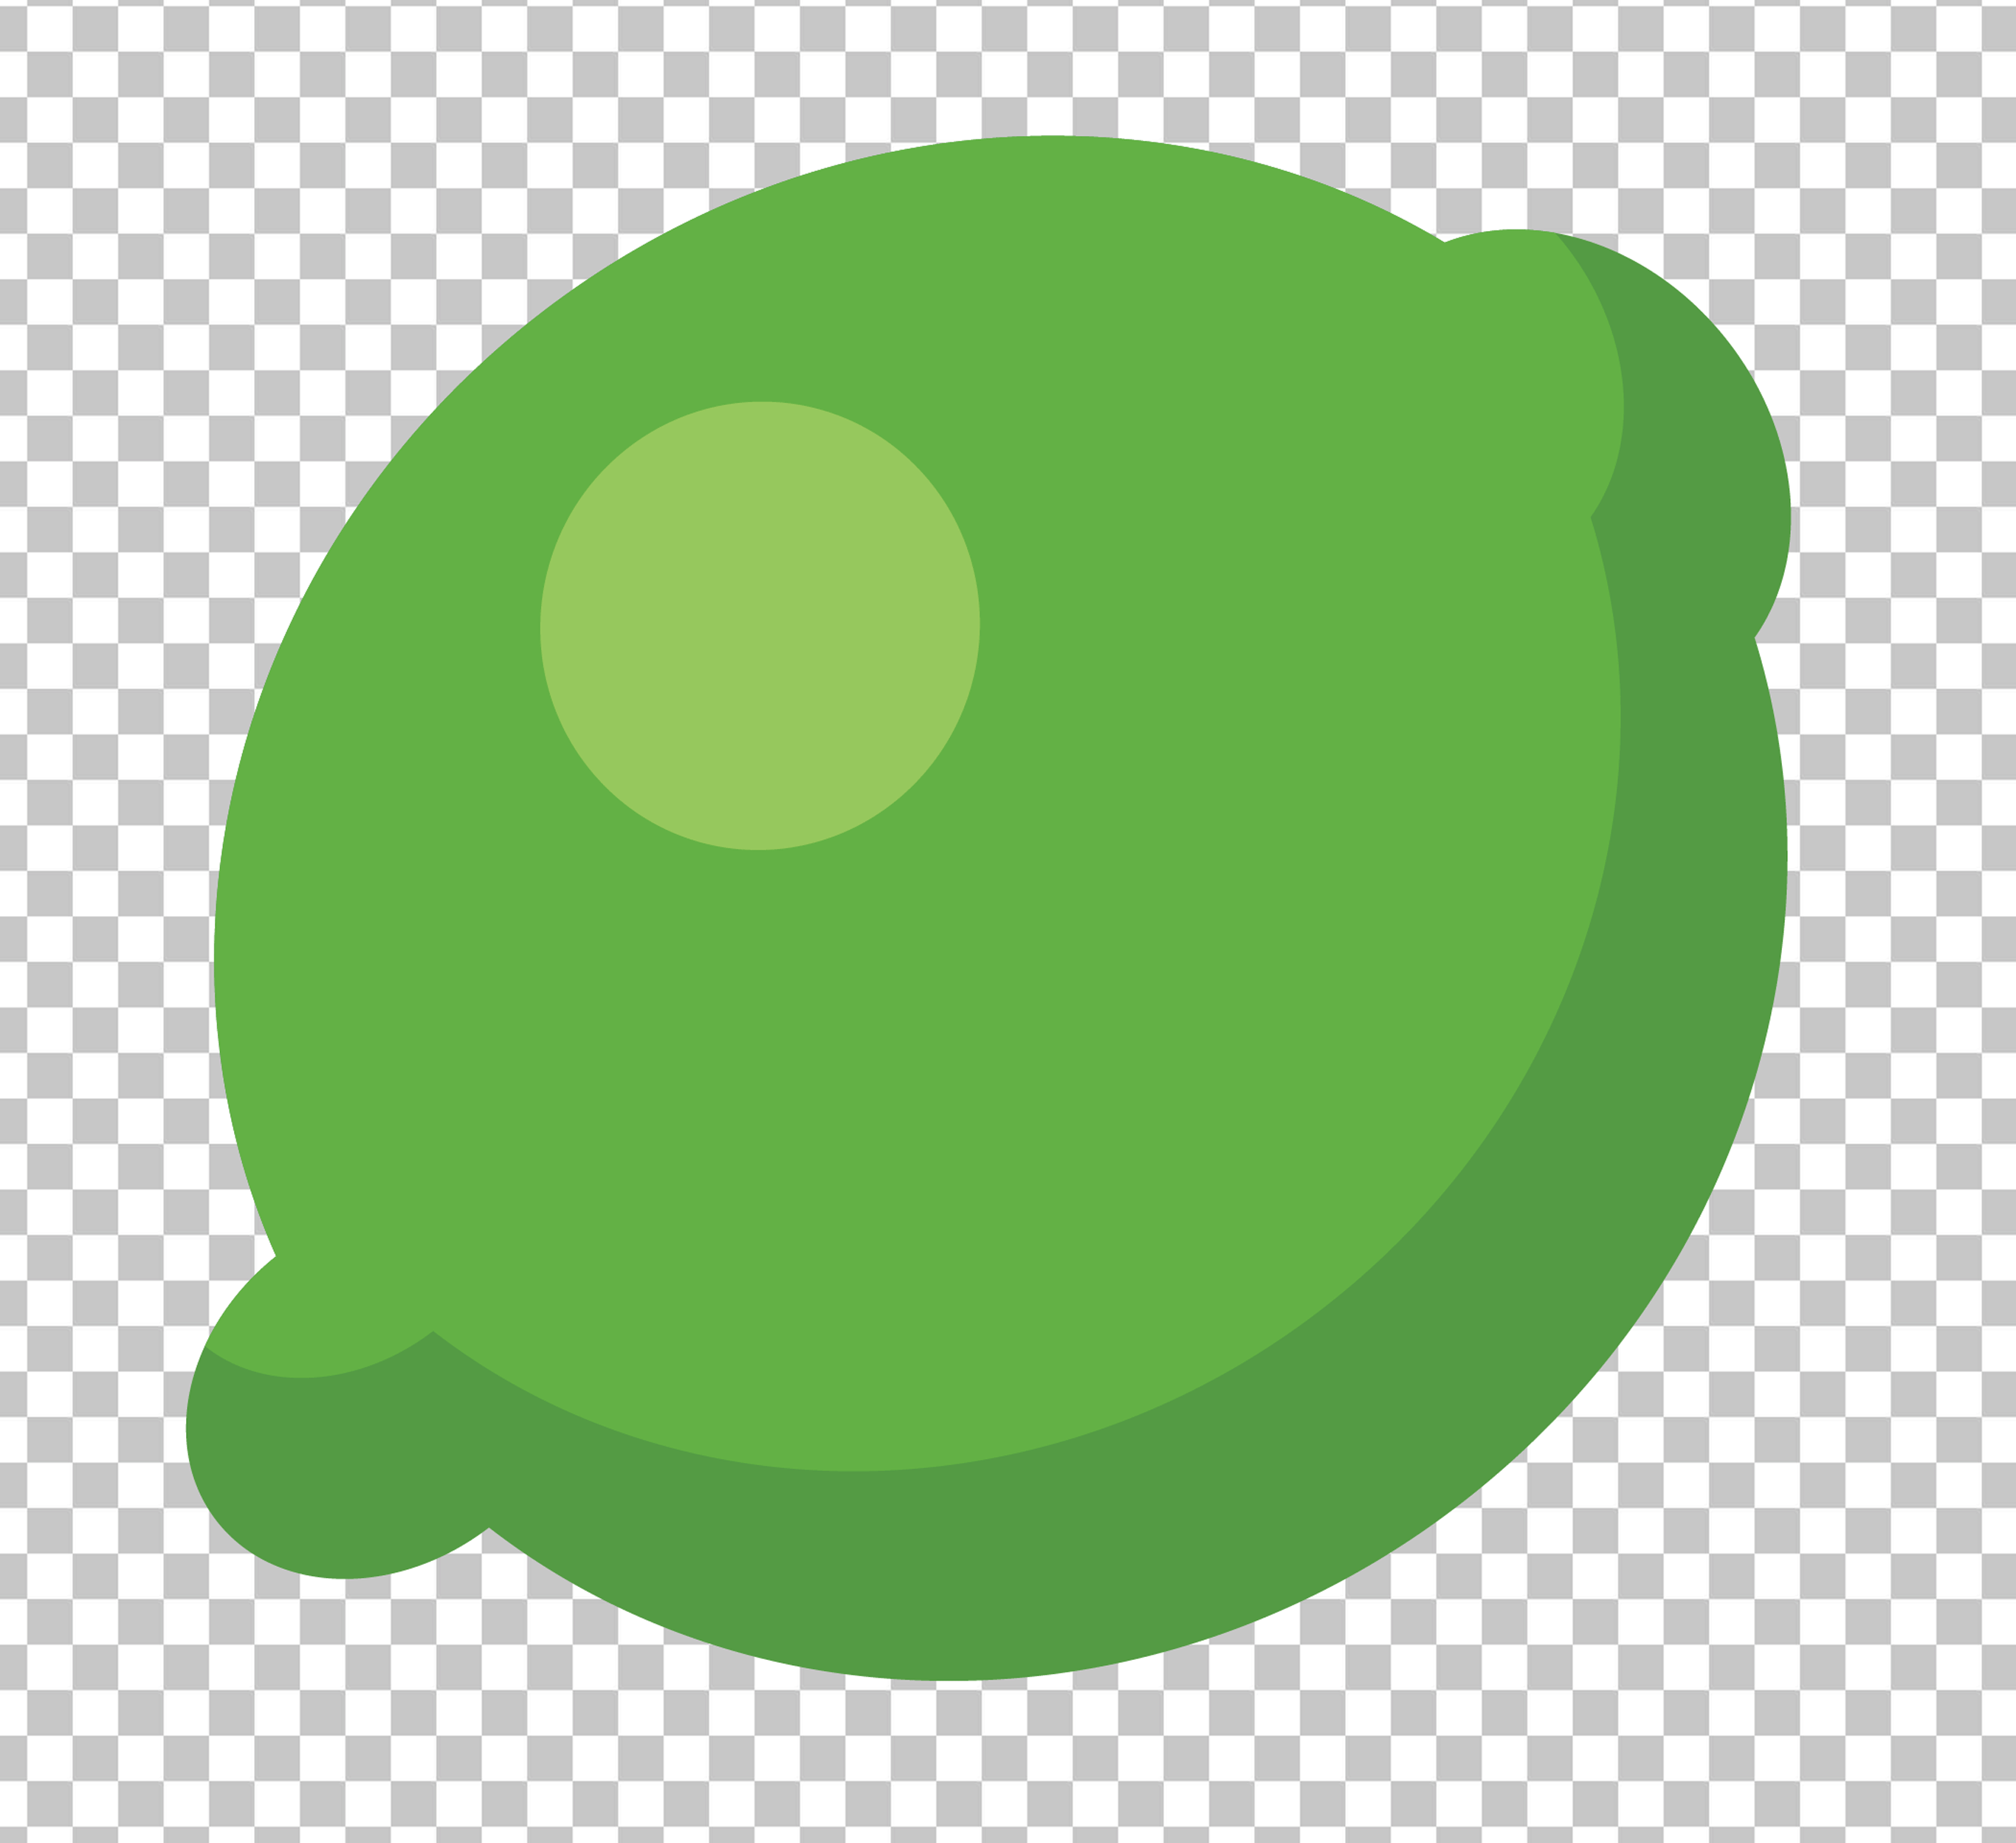 Green Lime PNG Image with Transparent Background.